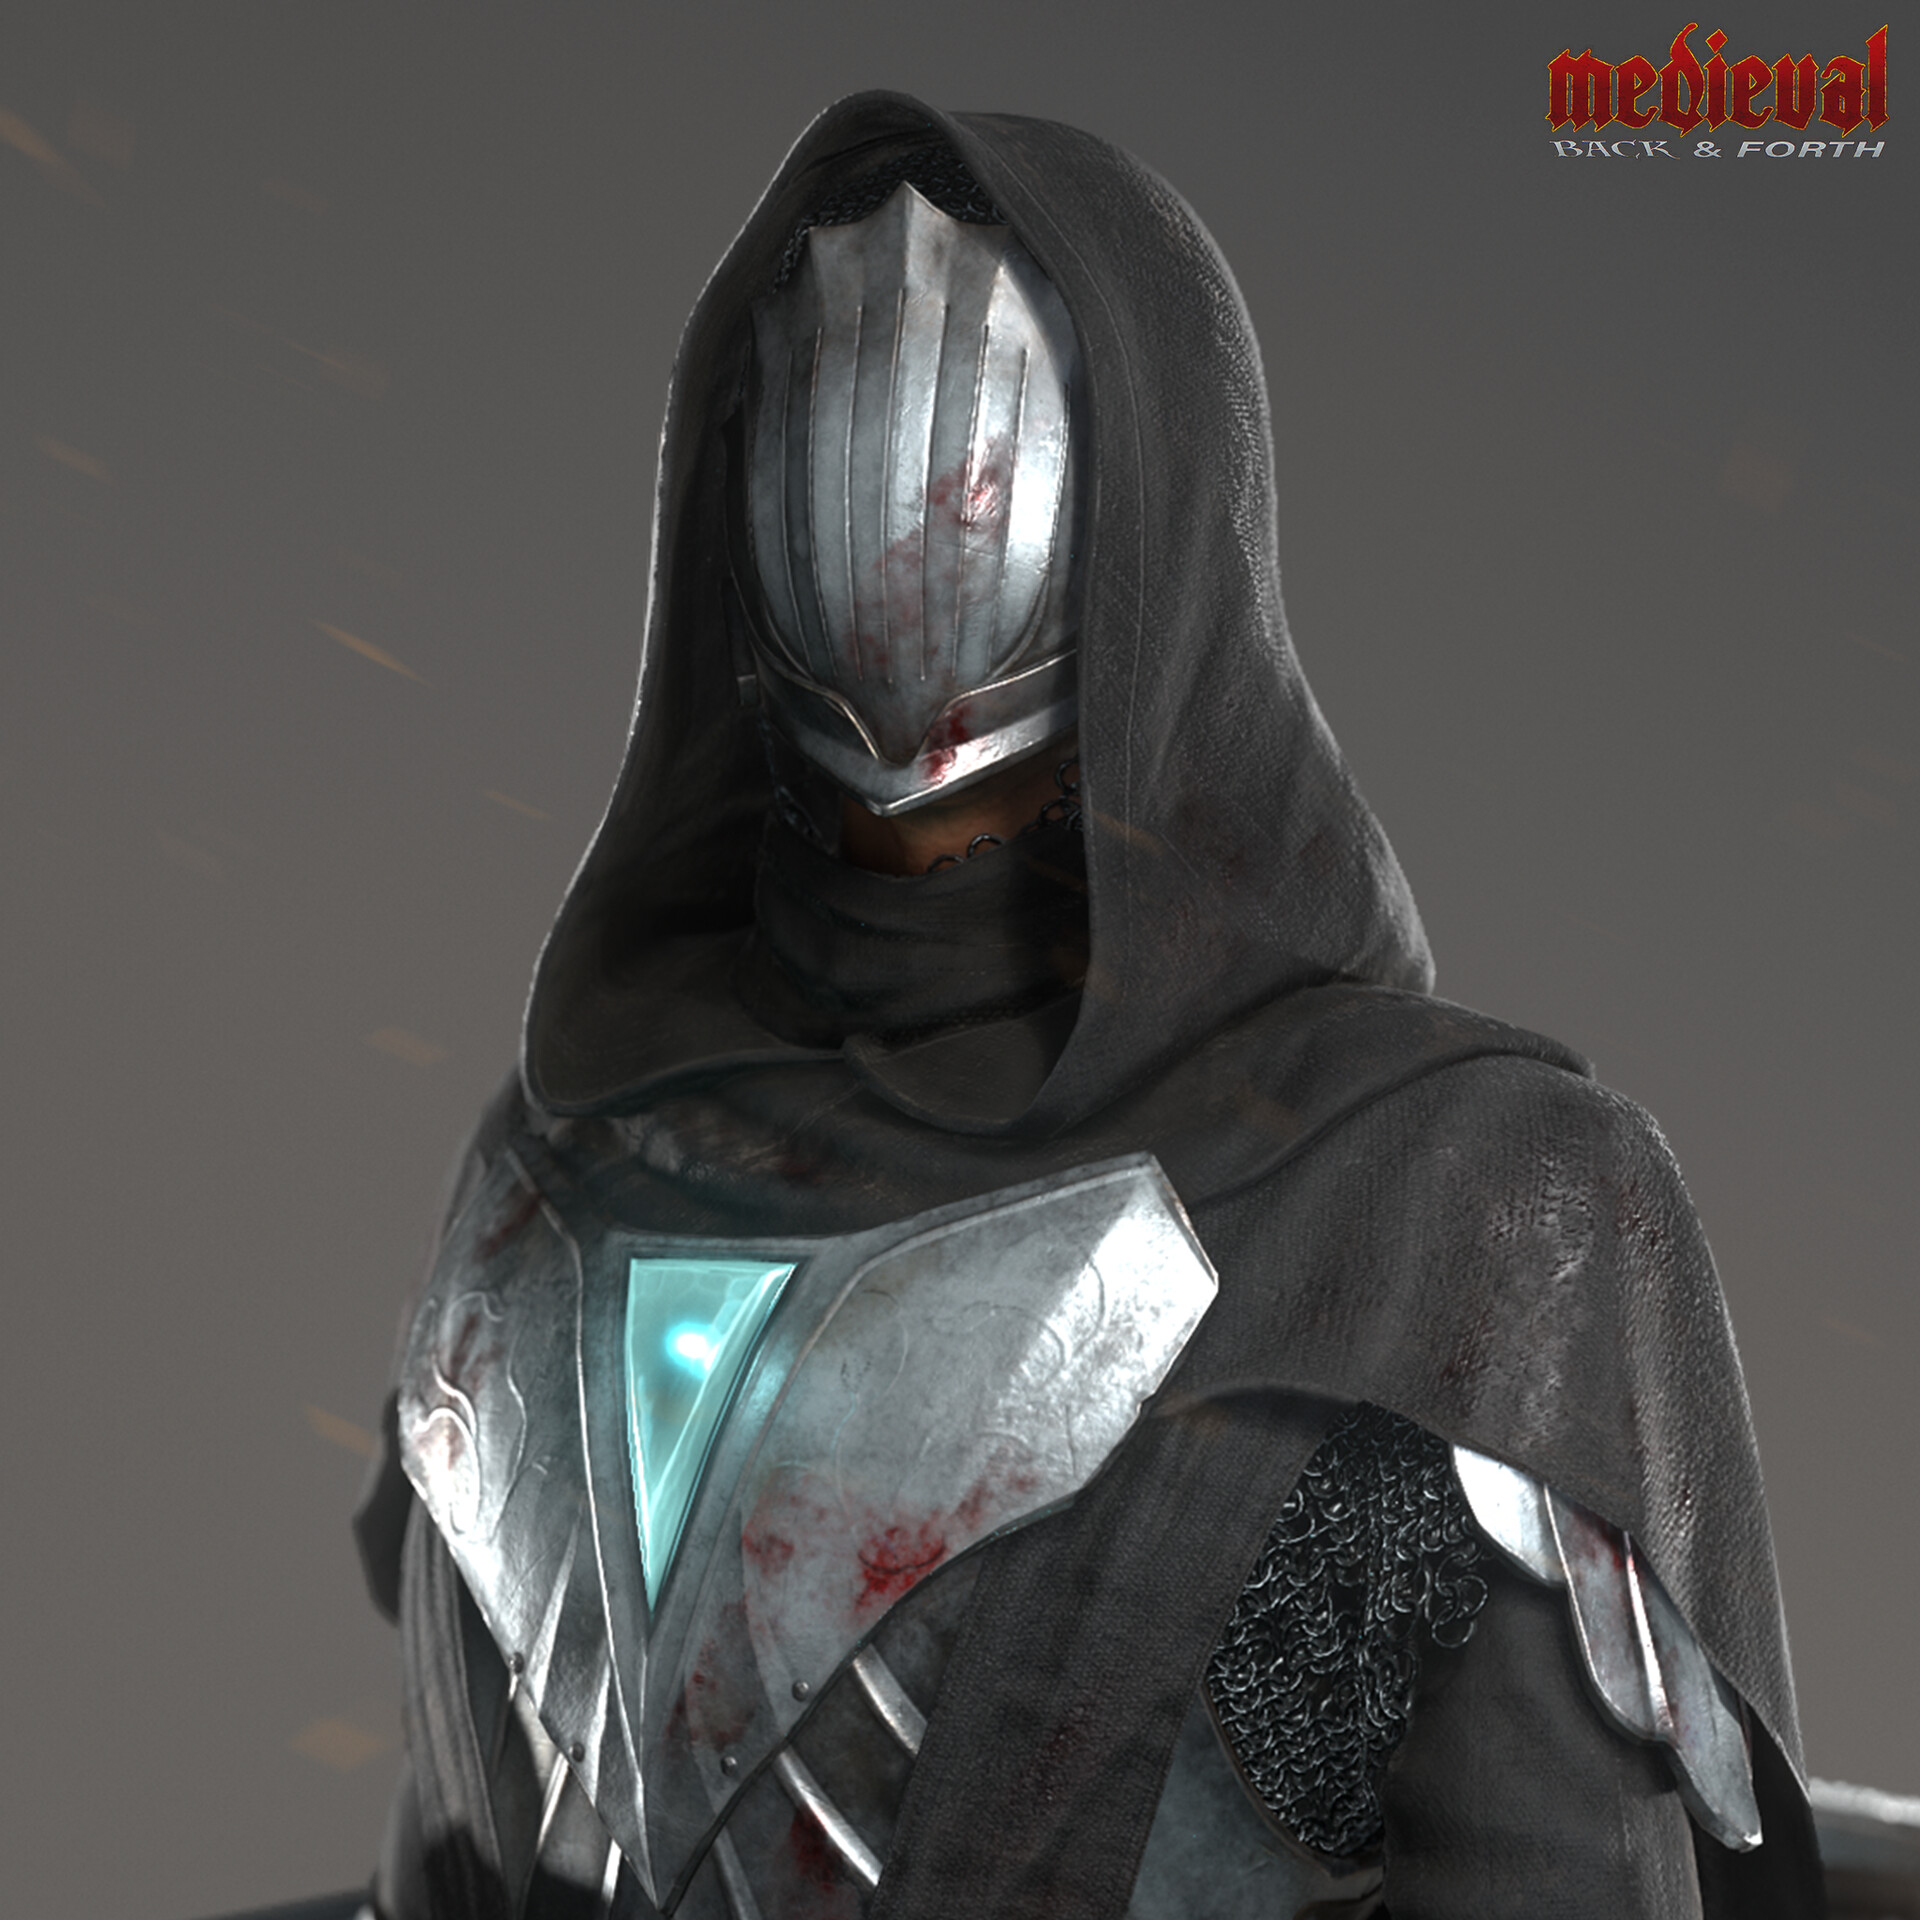 ArtStation - Knight | Medieval: Back and Forth Challenge